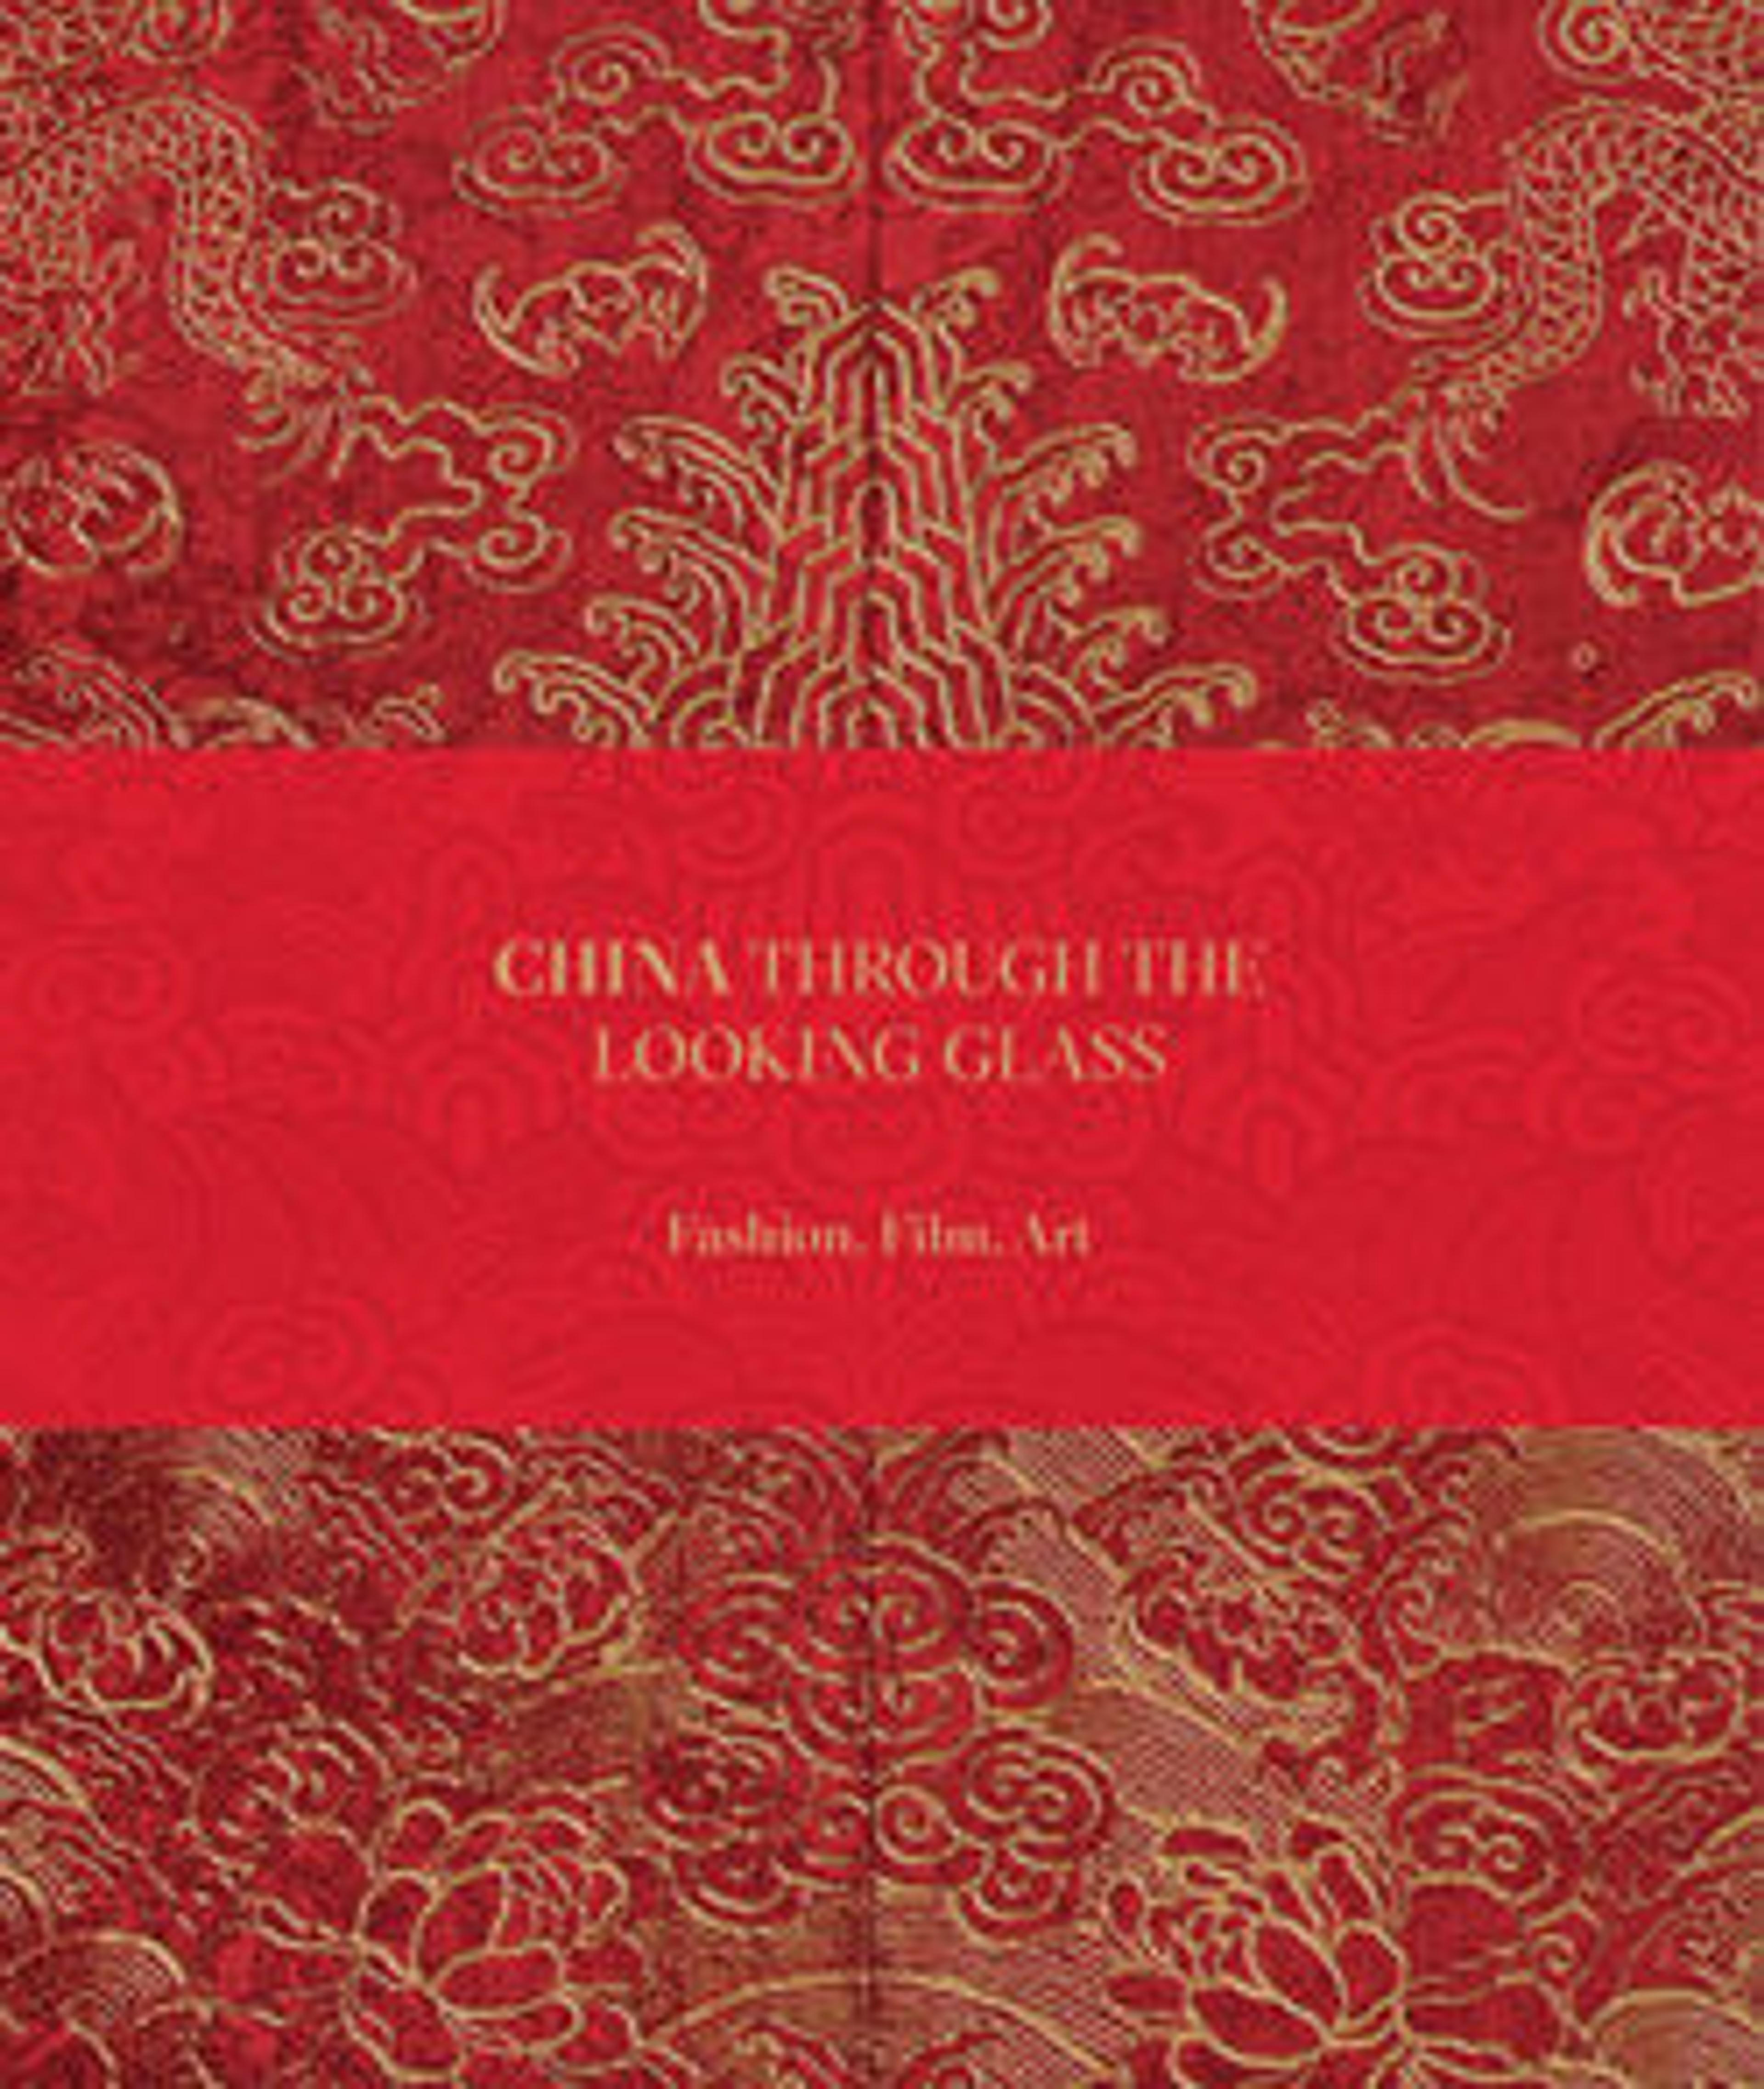 China: Through the Looking Glass book cover